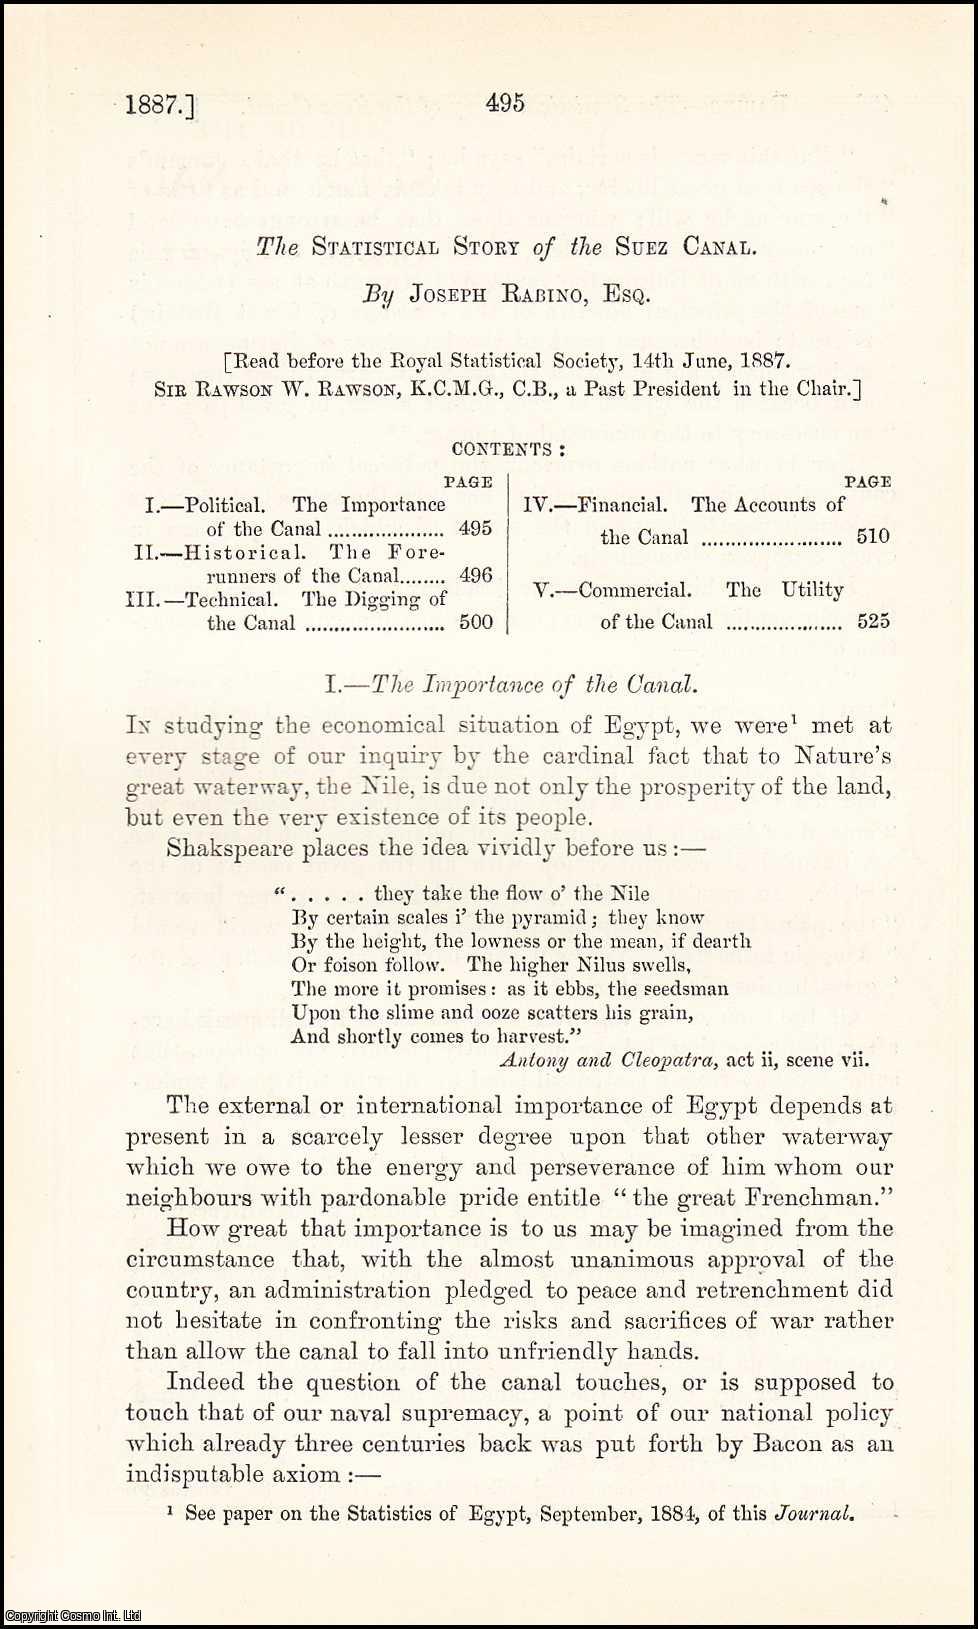 Joseph Rabino, Esq. - The Statistical Story of the Suez Canal. An uncommon original article from the Journal of the Royal Statistical Society of London, 1887.